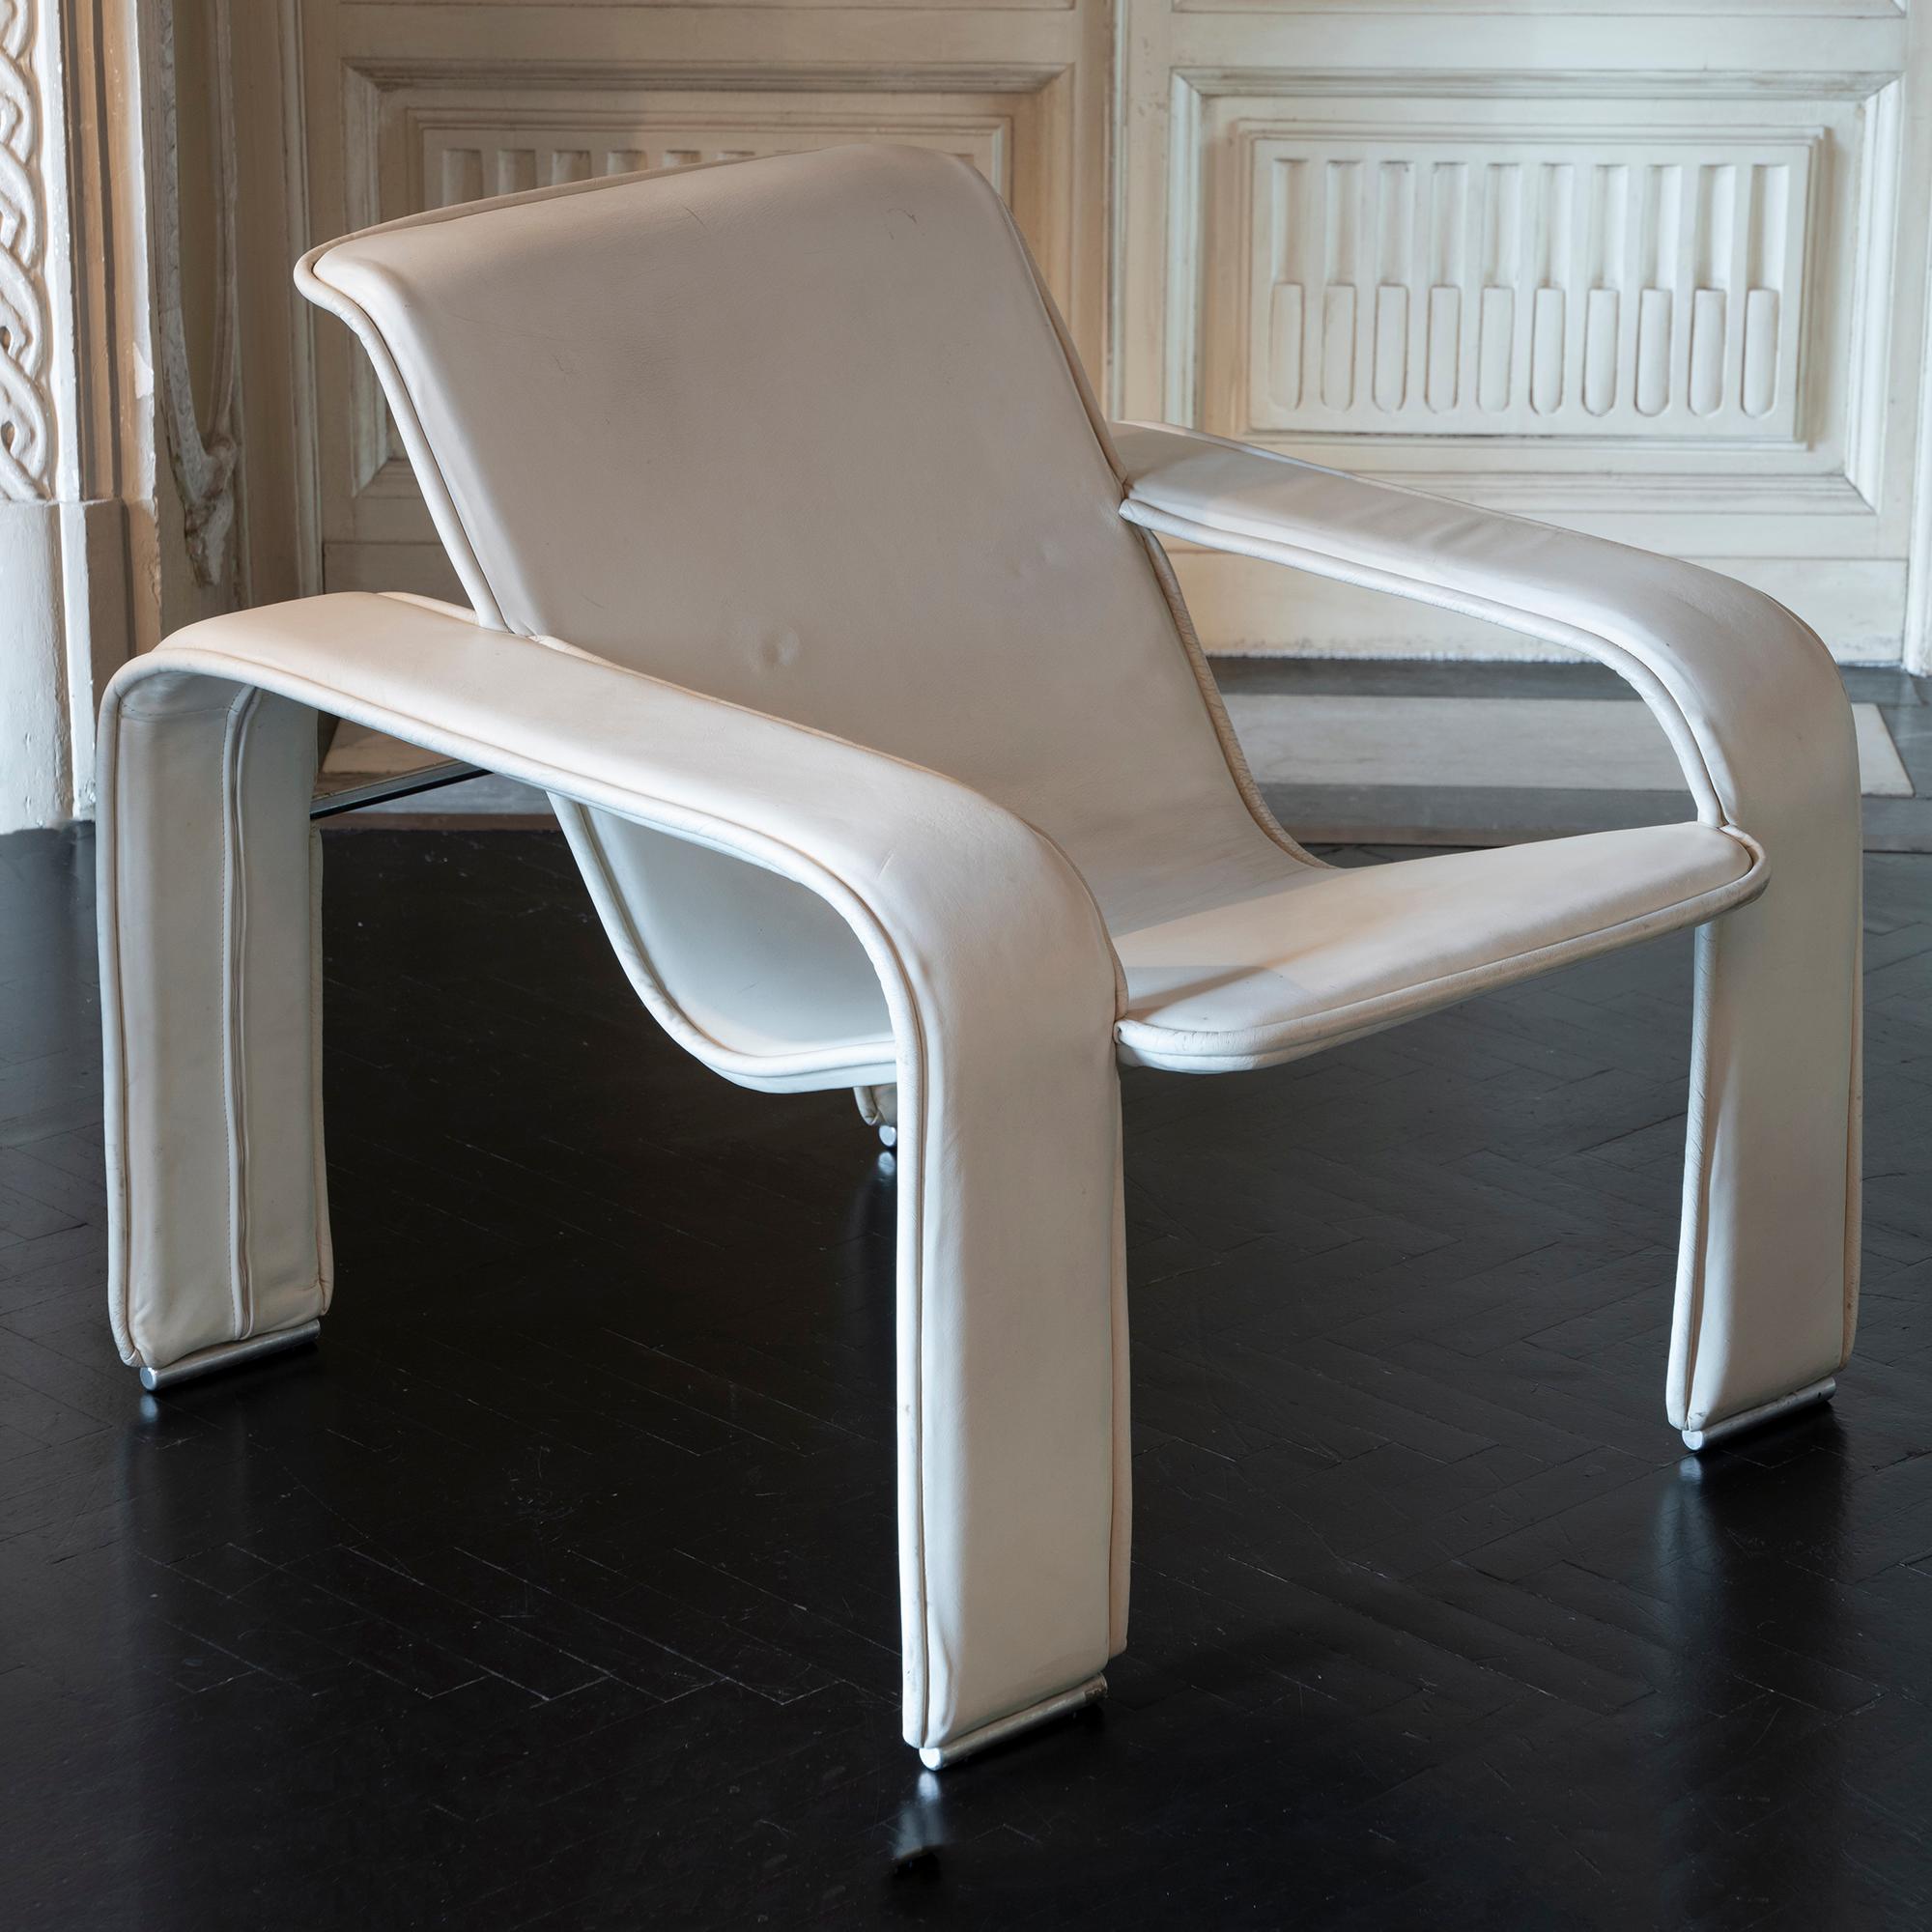 Antti Nurmesniemi pair of lounge chairs in original white leather, steel structure in perfect condition , the leather surface has some light scratches and dents like showed with beautiful and perfect vintage patina, Finland 1980s.